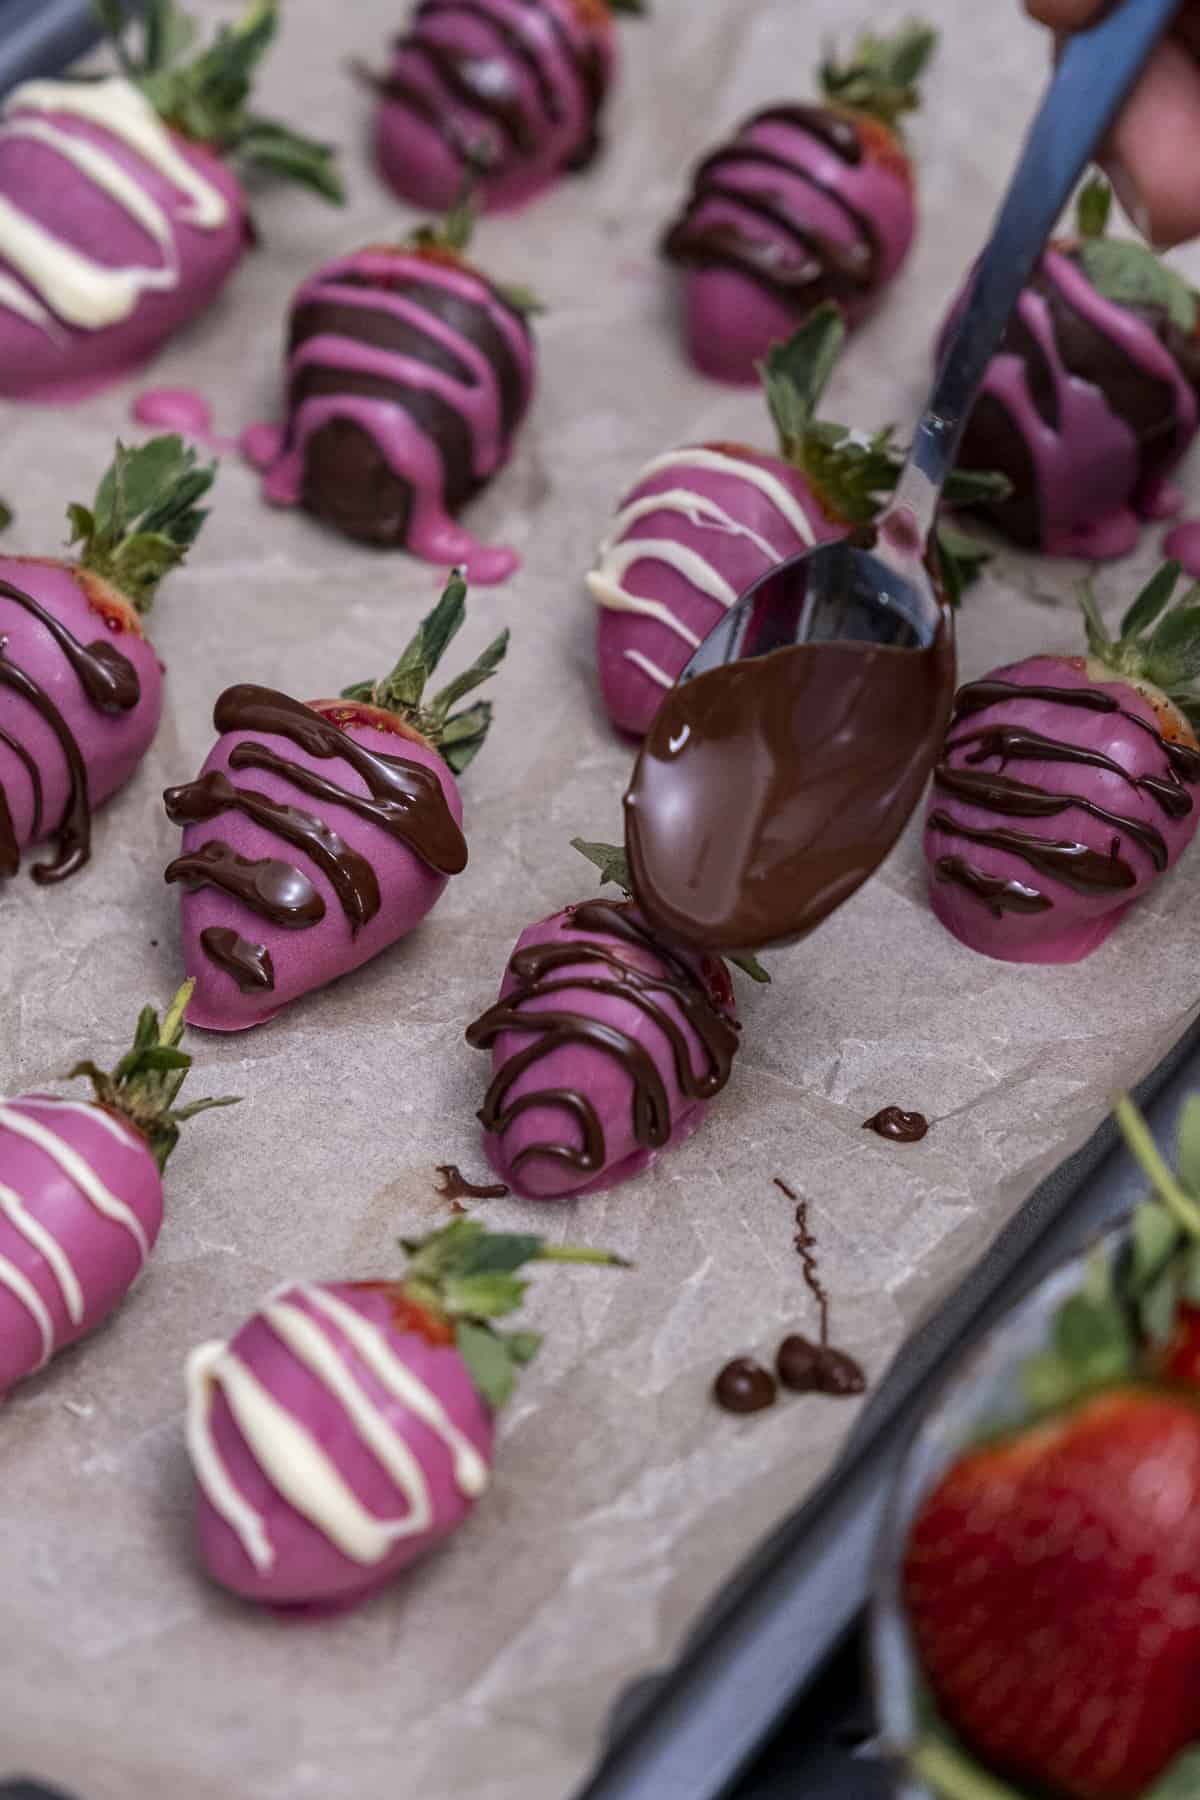 A spoon decorating pink strawberries with dark and white chocolate drizzles.